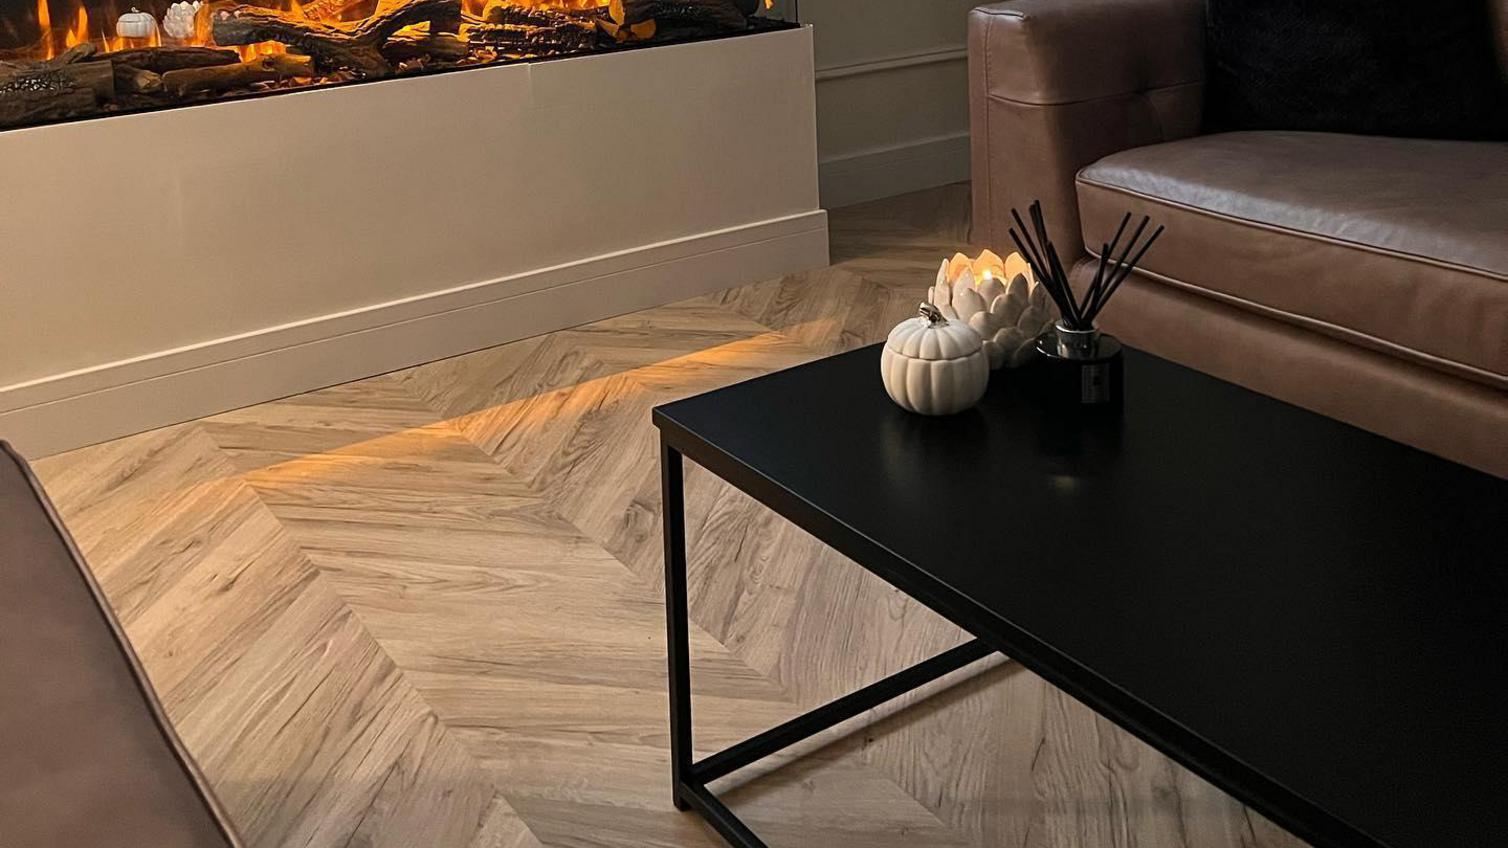 A luxe living room idea using oak chevron flooring. Contains a black coffee table, a brown leather sofa, and white skirting.